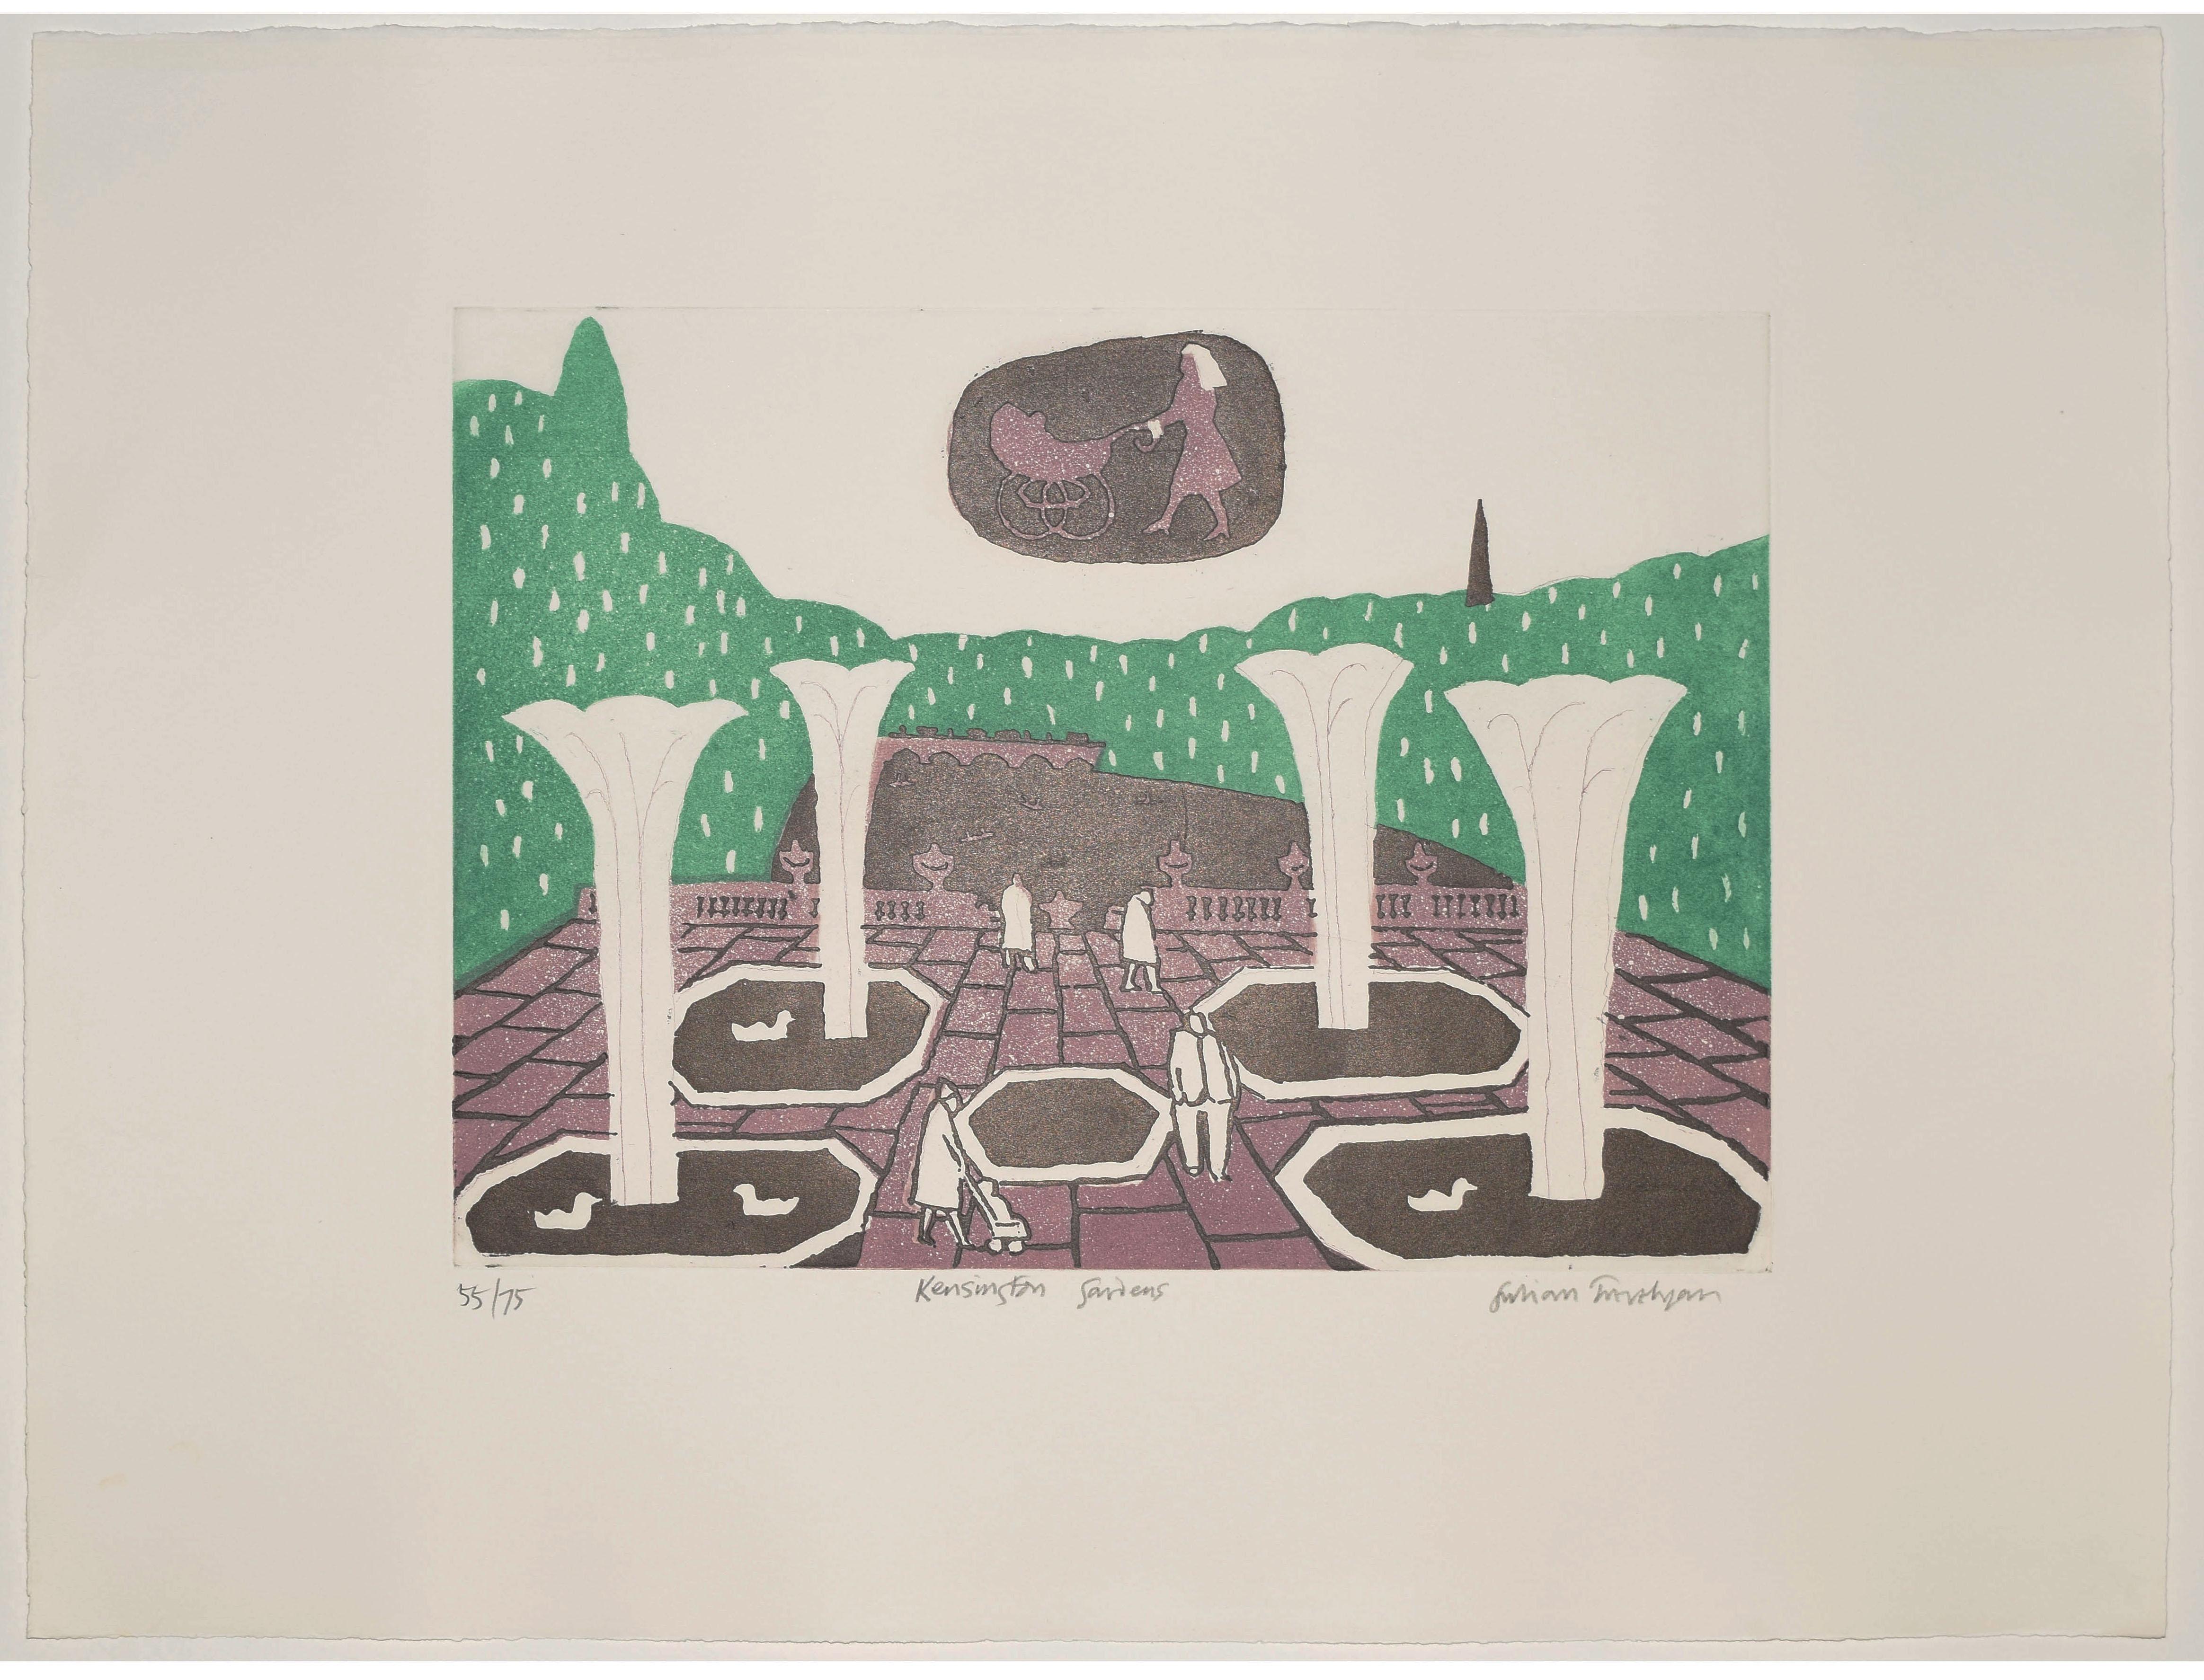 Julian Trevelyan (1910-1988)
Kensington Gardens (1969)
Etching and aquatint, signed, numbered 55/75
35x48cm

Nephew of the historian G M Trevelyan he was educated at Bedales and Trinity College, Cambridge, reading English. Moving to Paris and